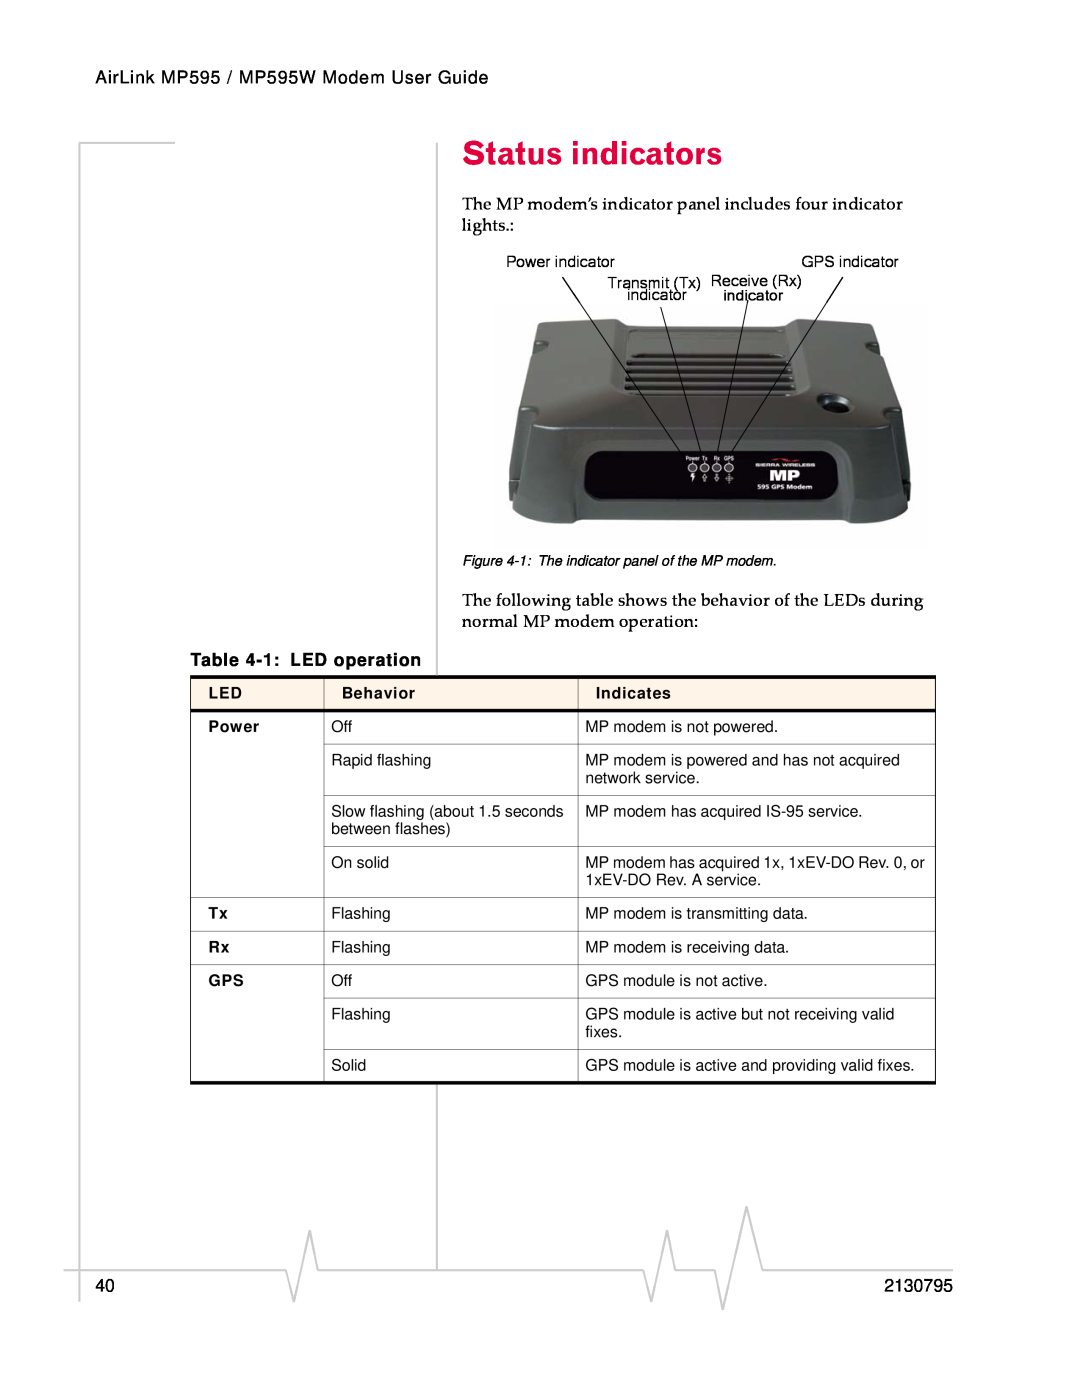 Sierra Wireless manual Status indicators, AirLink MP595 / MP595W Modem User Guide, 1 LED operation, 2130795 